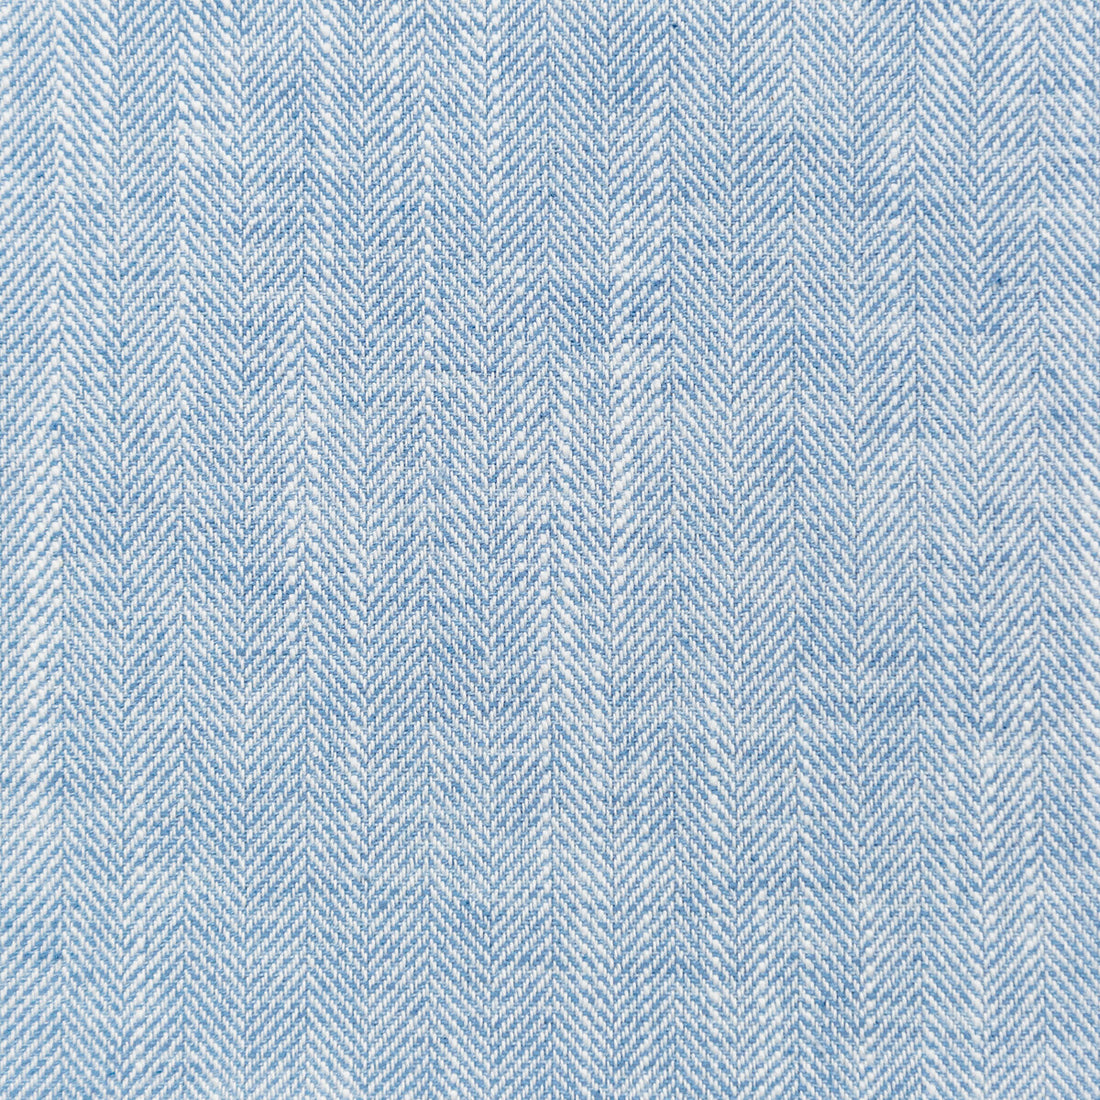 Mataru fabric in chambray color - pattern 35763.15.0 - by Kravet Basics in the Ceylon collection